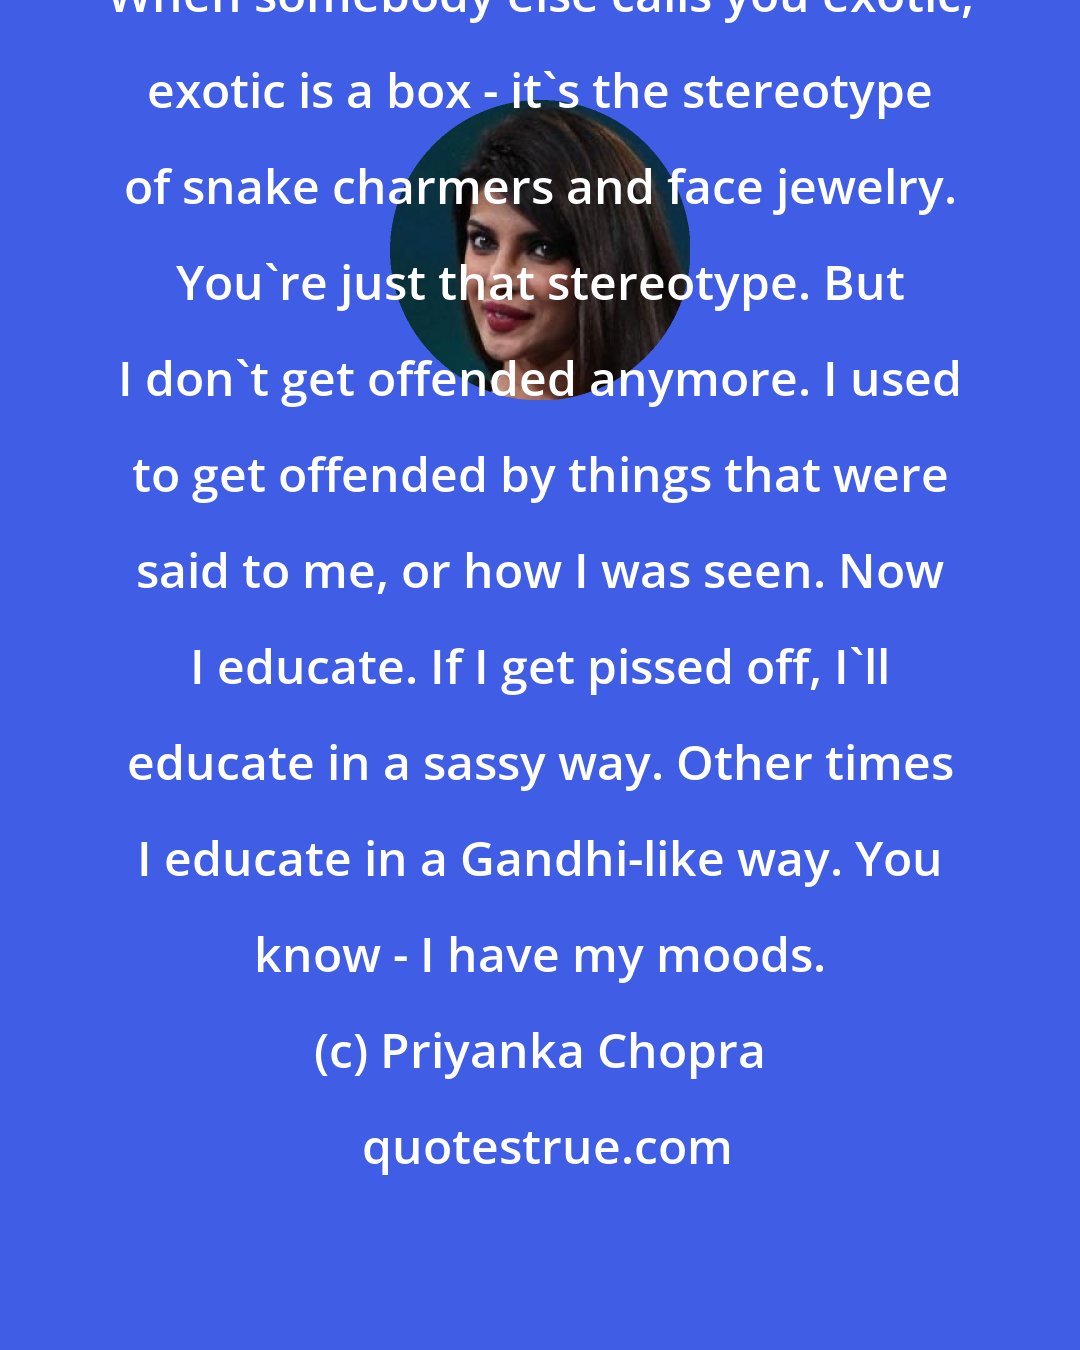 Priyanka Chopra: When somebody else calls you exotic, exotic is a box - it's the stereotype of snake charmers and face jewelry. You're just that stereotype. But I don't get offended anymore. I used to get offended by things that were said to me, or how I was seen. Now I educate. If I get pissed off, I'll educate in a sassy way. Other times I educate in a Gandhi-like way. You know - I have my moods.